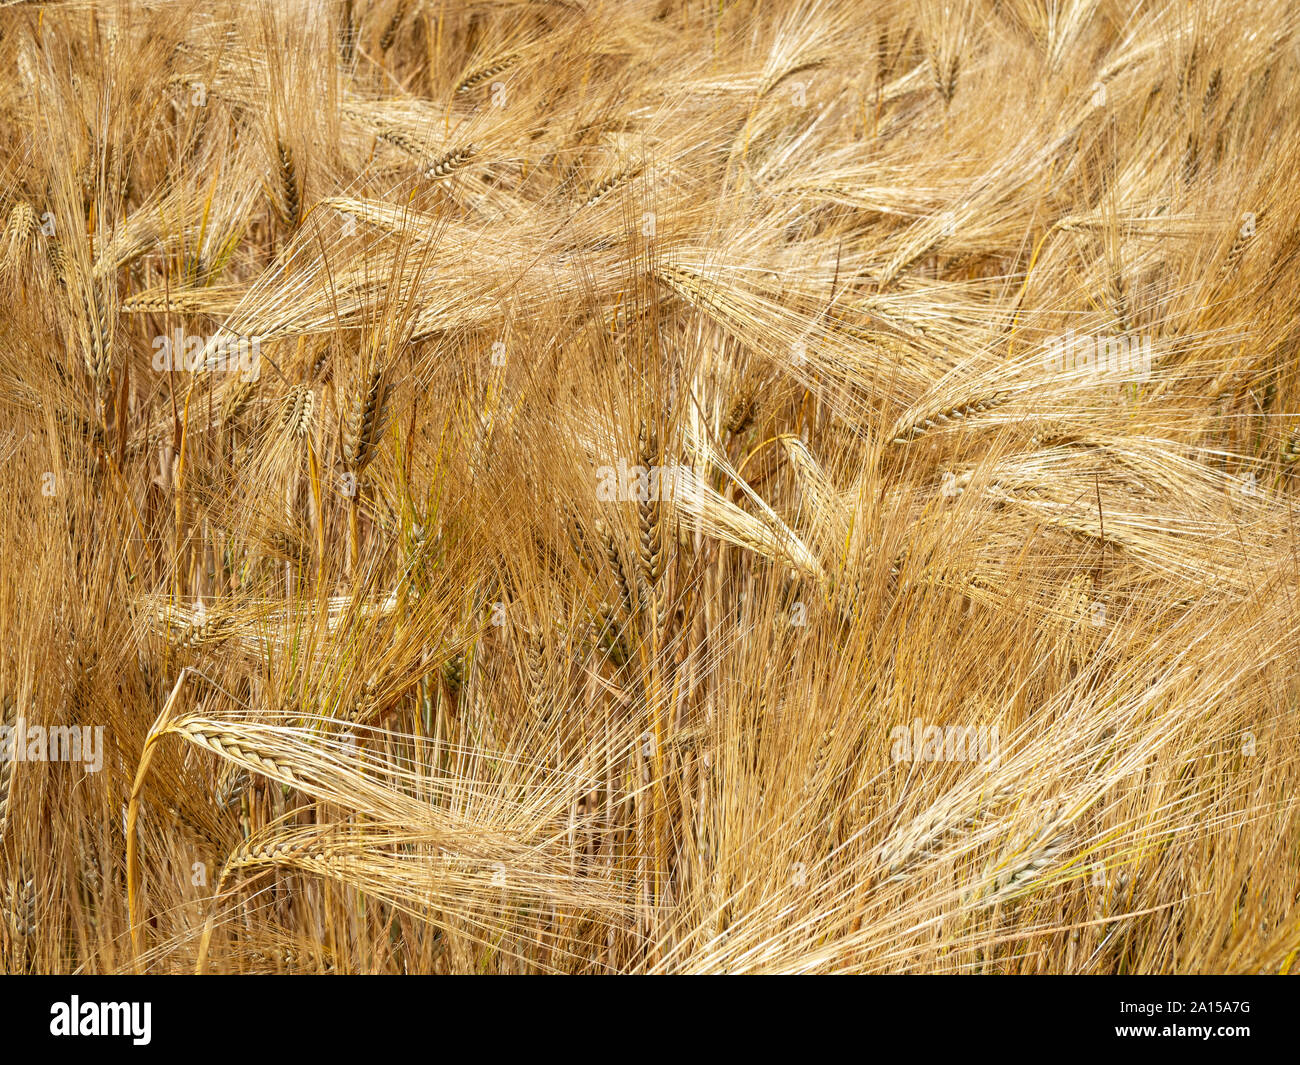 A close uo of a field of golden barley ripe and ready for harvest Stock Photo